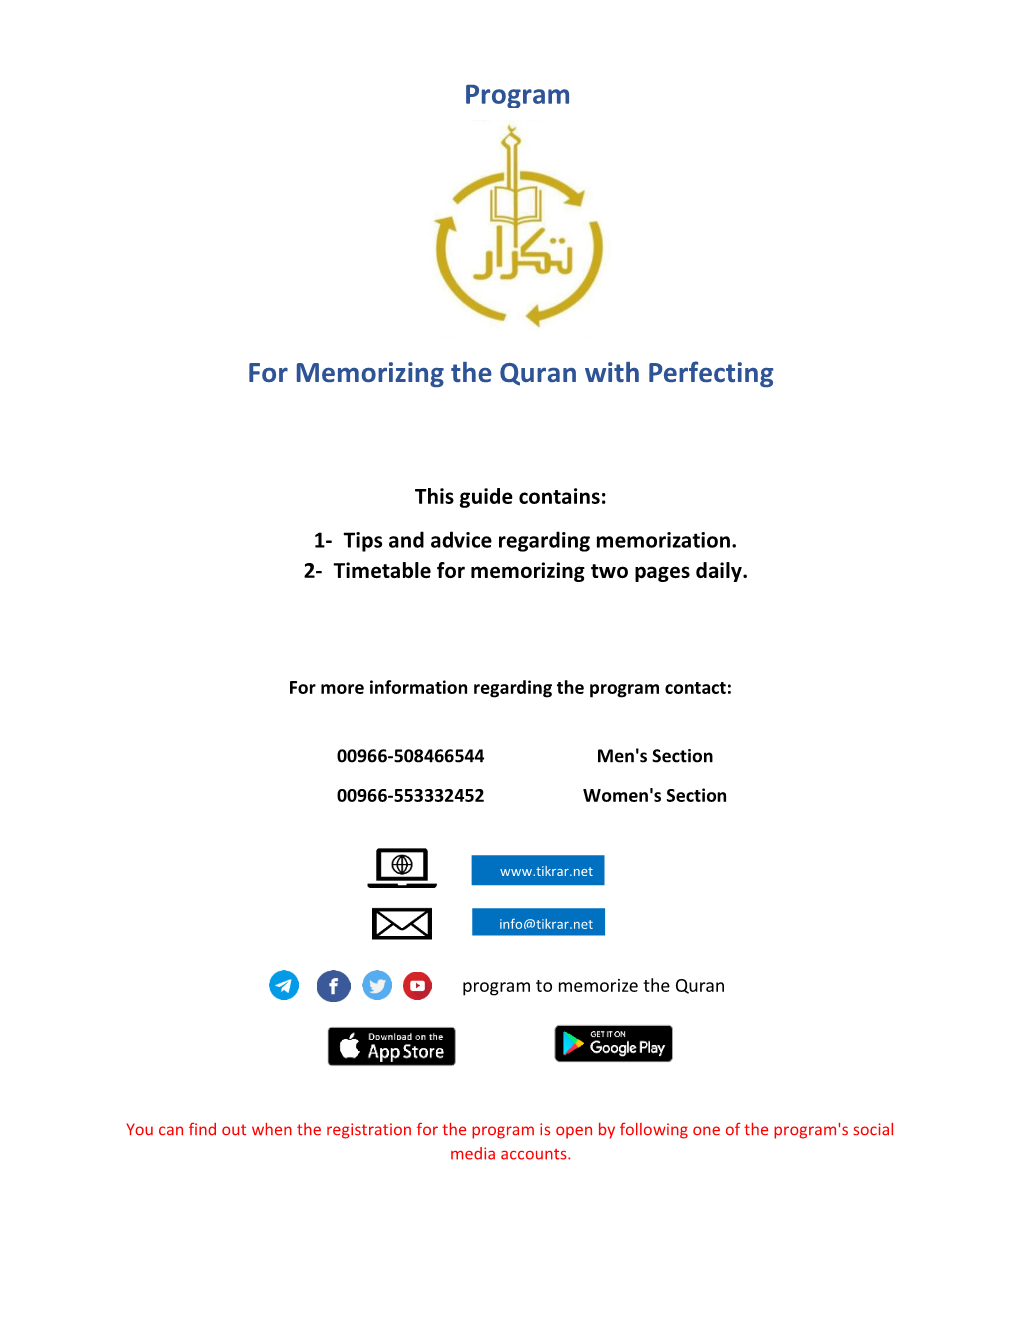 For Memorizing the Quran with Perfecting Program